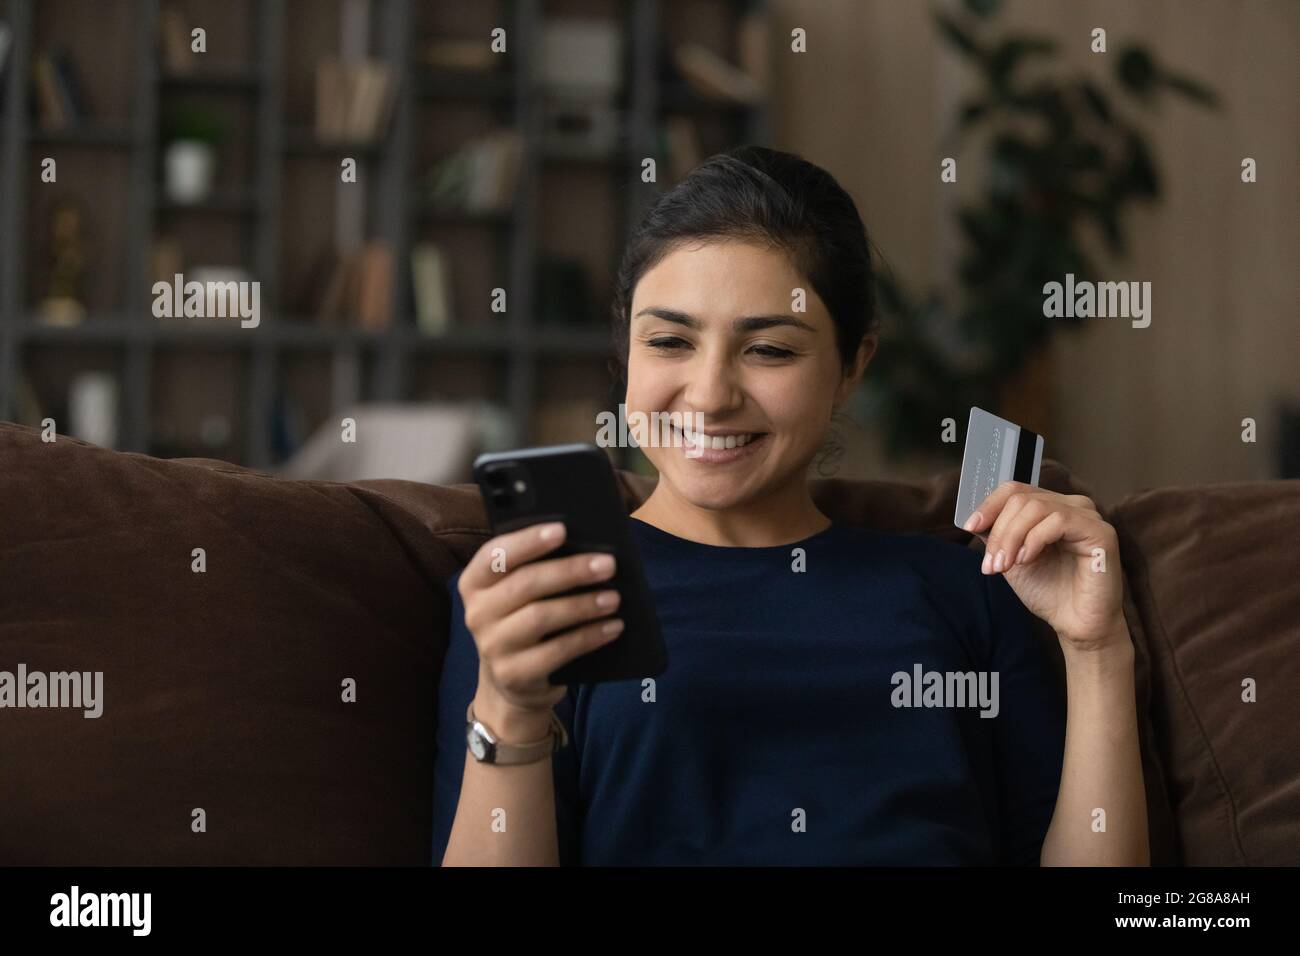 Smiling Indian female buyer shopping online on smartphone Stock Photo